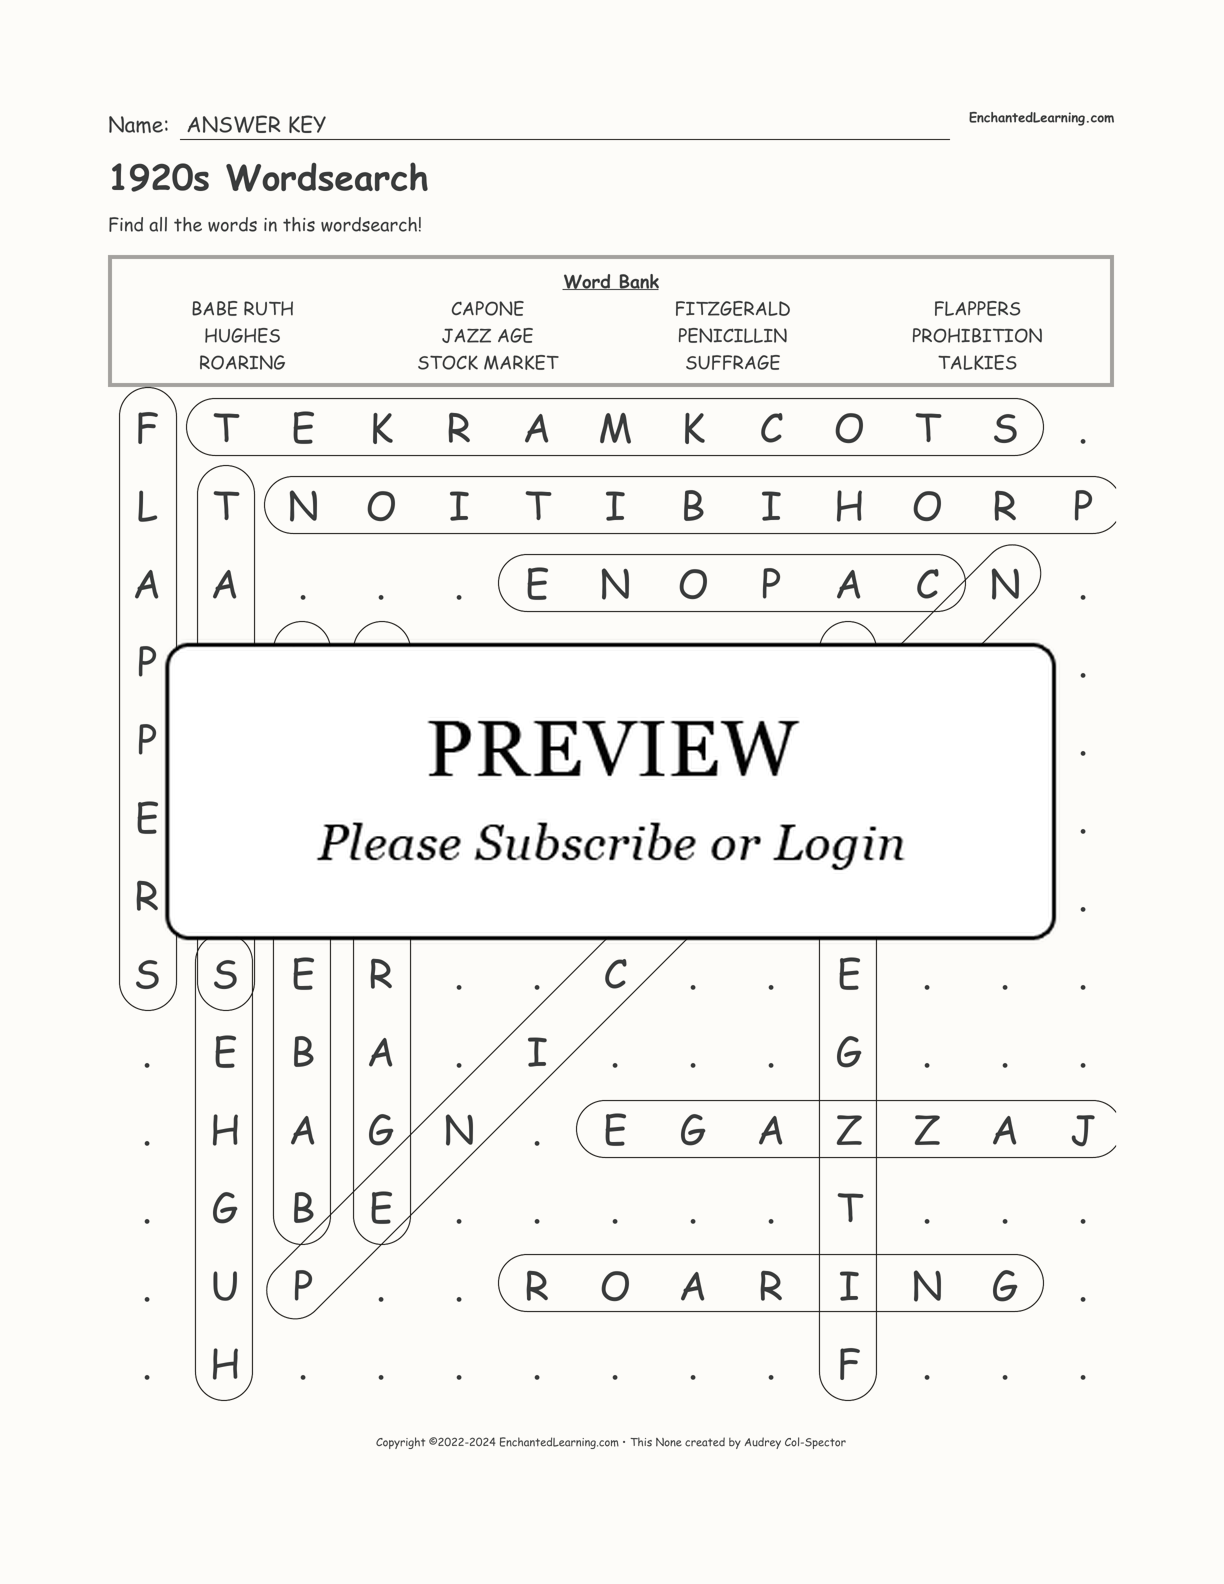 1920s Wordsearch interactive worksheet page 2